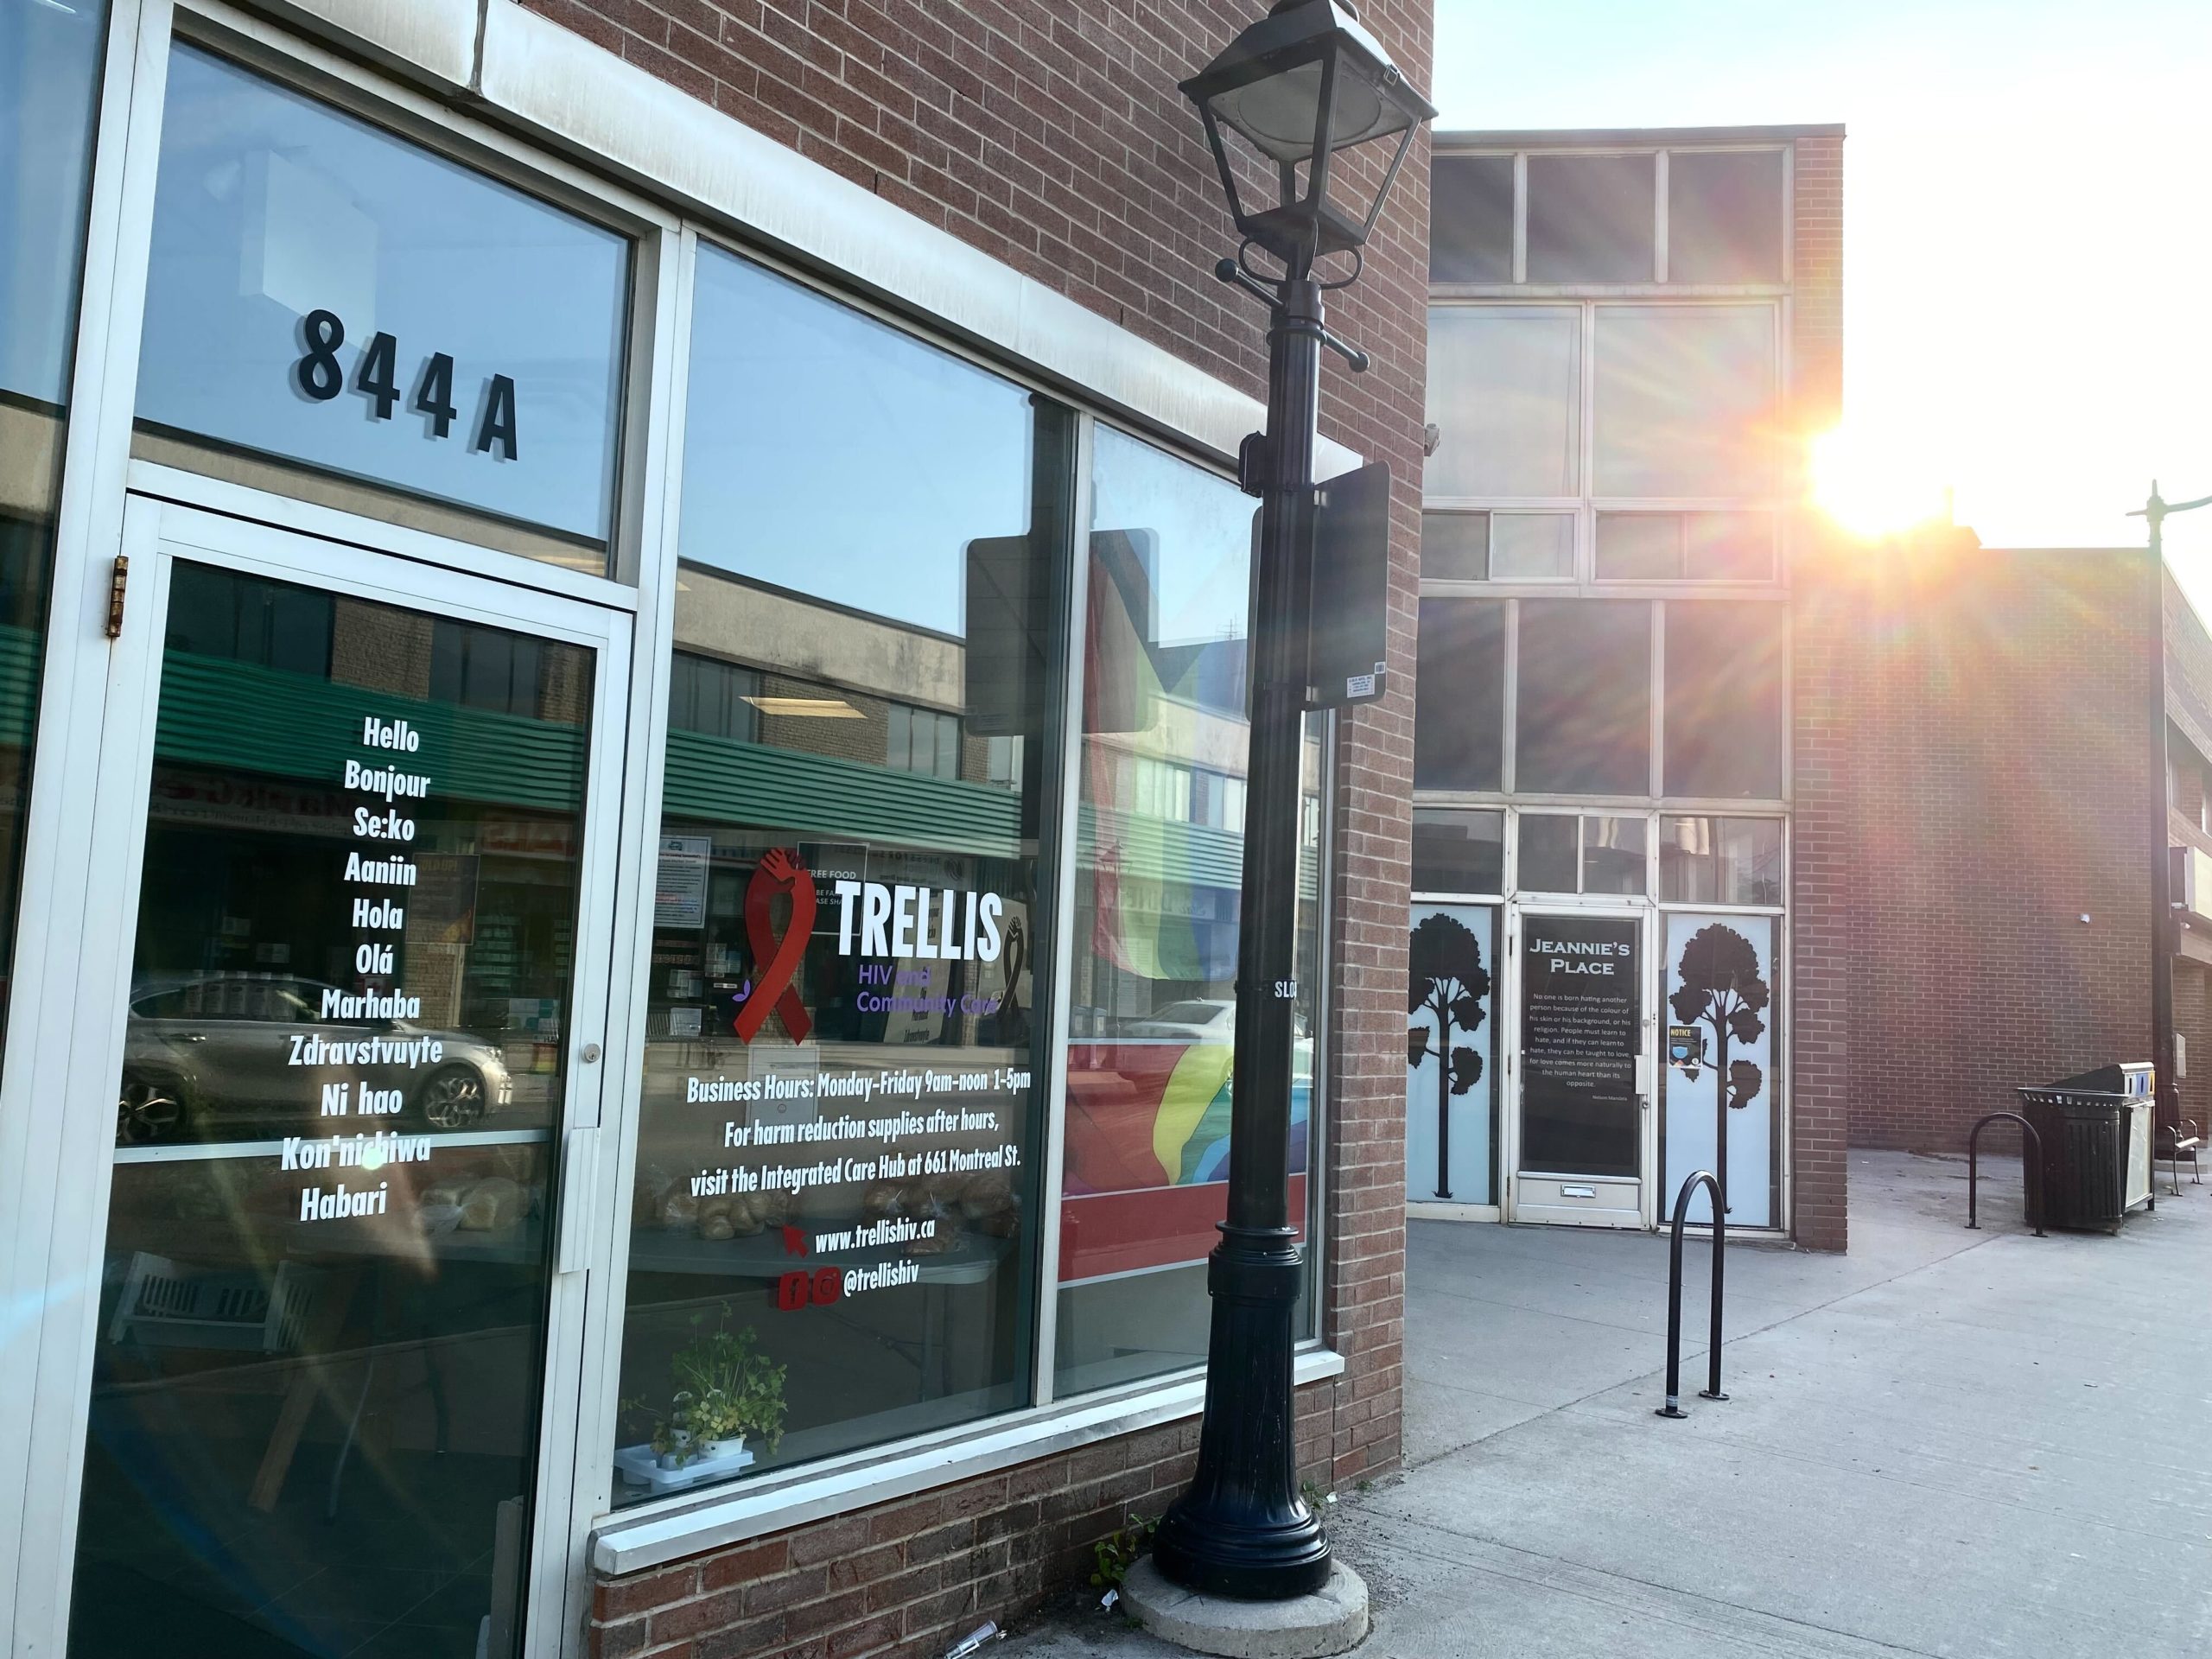 Image of 844a Princess Street. The building has lots of windows, with greeting signage that says "welcome" in several languages. The sun in setting in the background.